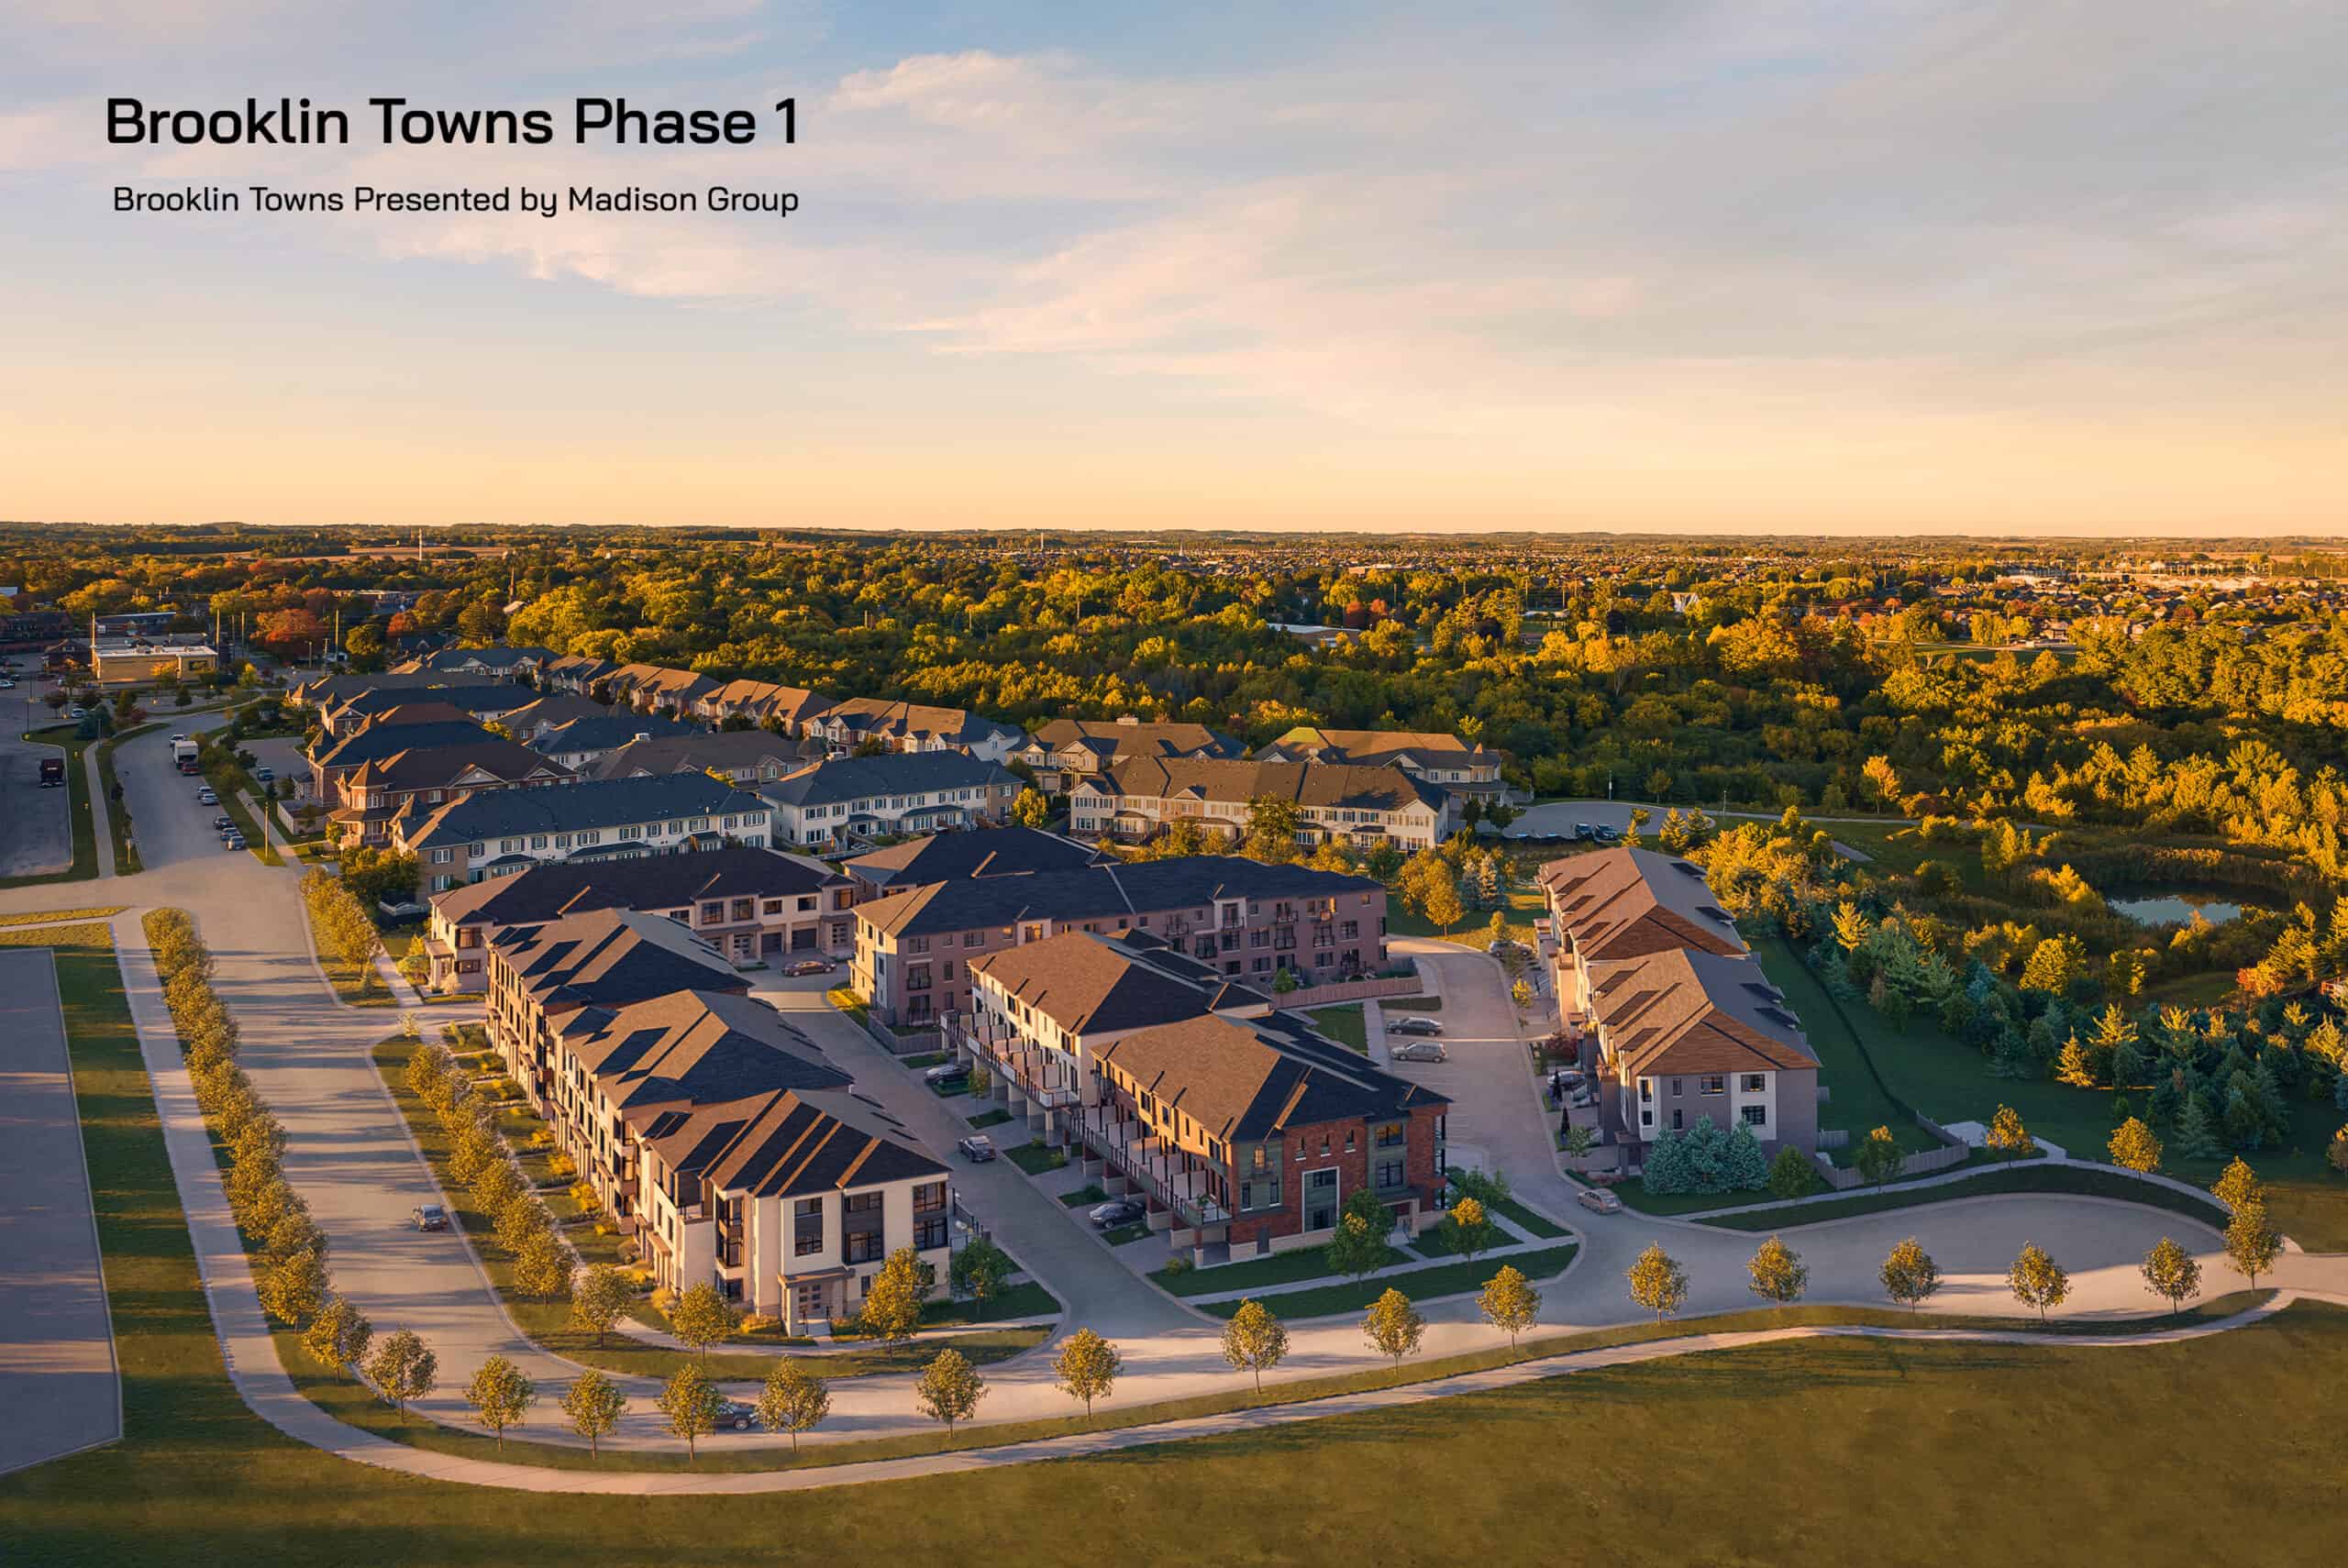 Brooklin Towns Phase 1 Presented by Madison Group